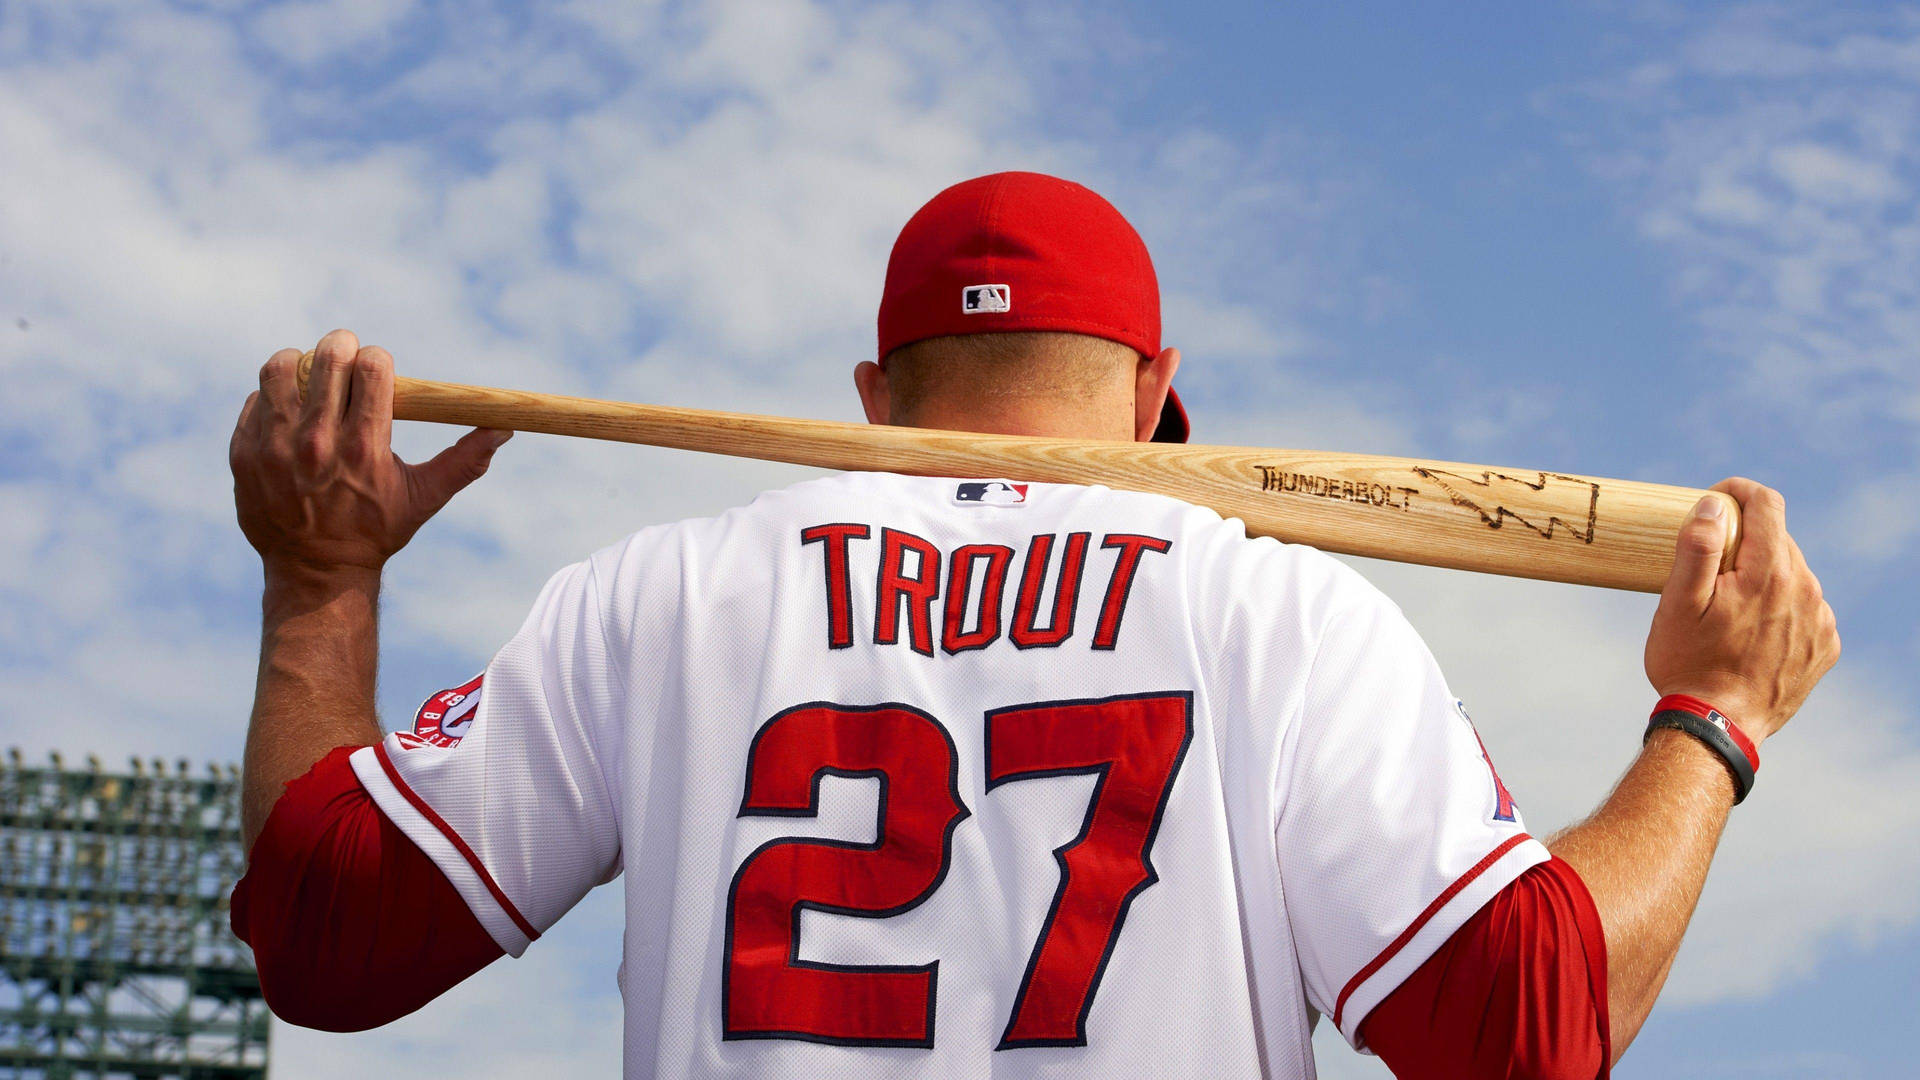 Mike Trout Wallpaper Discover more Angels, Baseball, Los Angeles